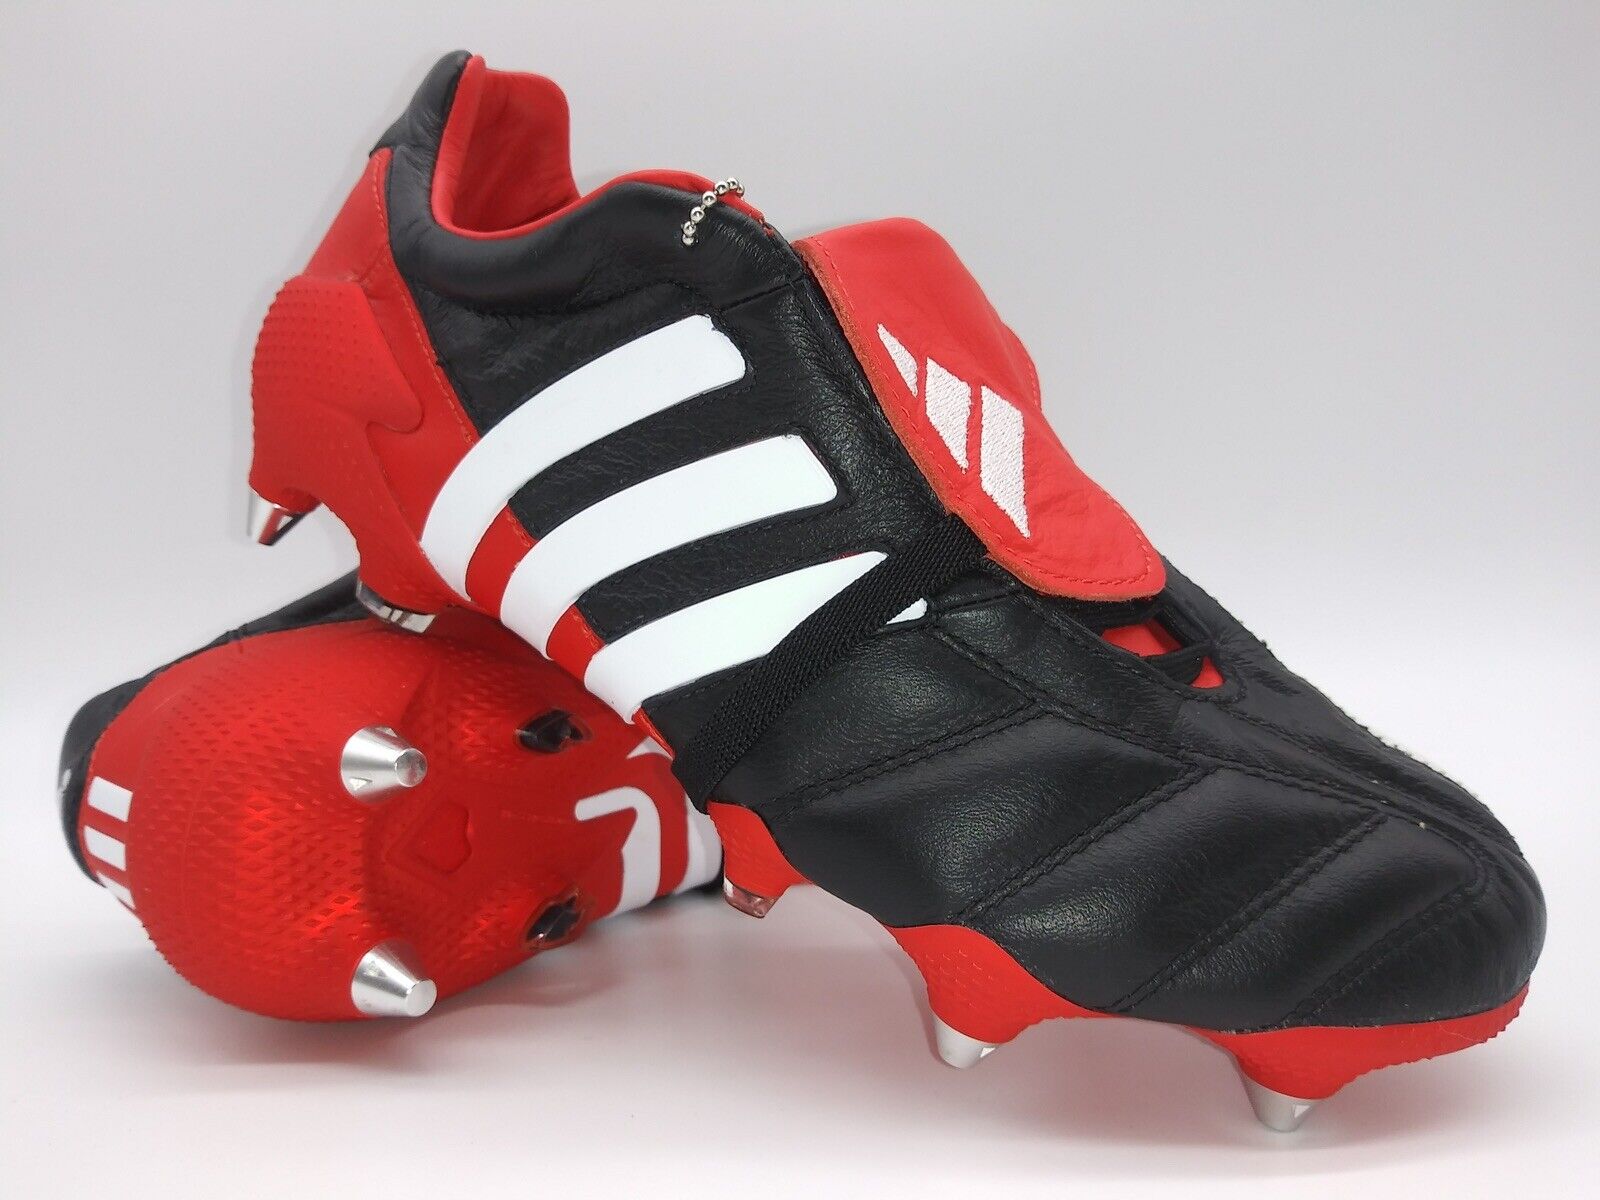 Adidas Mania Black Red Limited Edition (Only 2002 Pairs Villegas Footwear